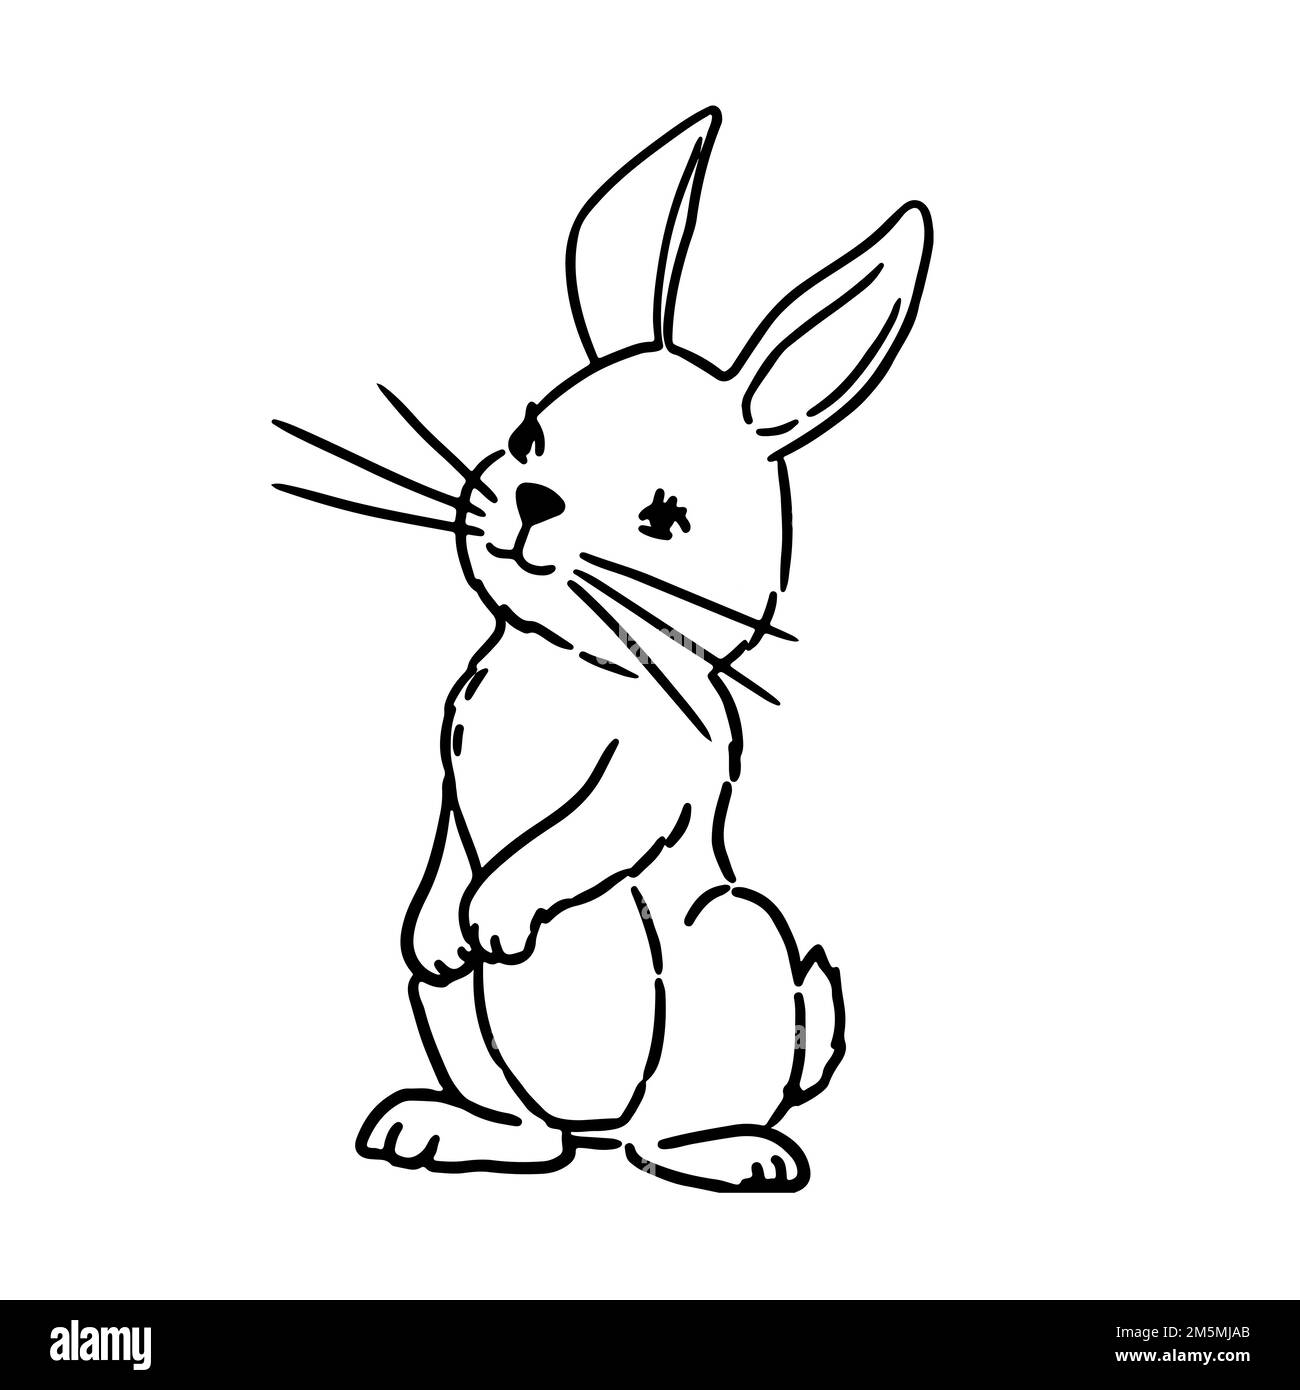 Vector coloring book illustration. Cute Hand Drawn Bunny isolatet on wite background Stock Vector